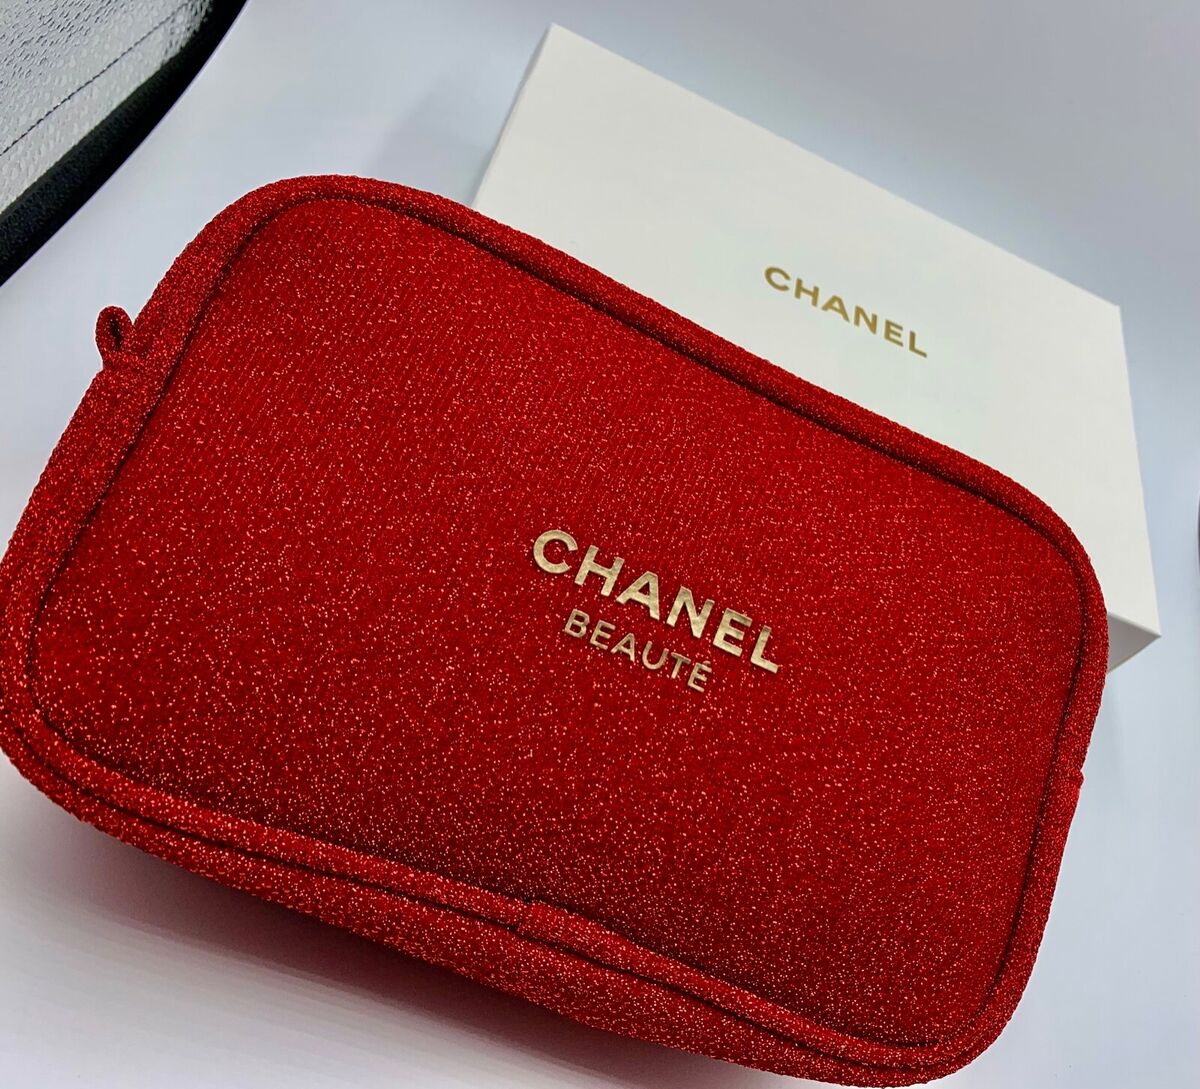 CHANEL Beaute Cosmetic Makeup Bag Pouch Clutch Sparkling RED GOLD w/ gift  box